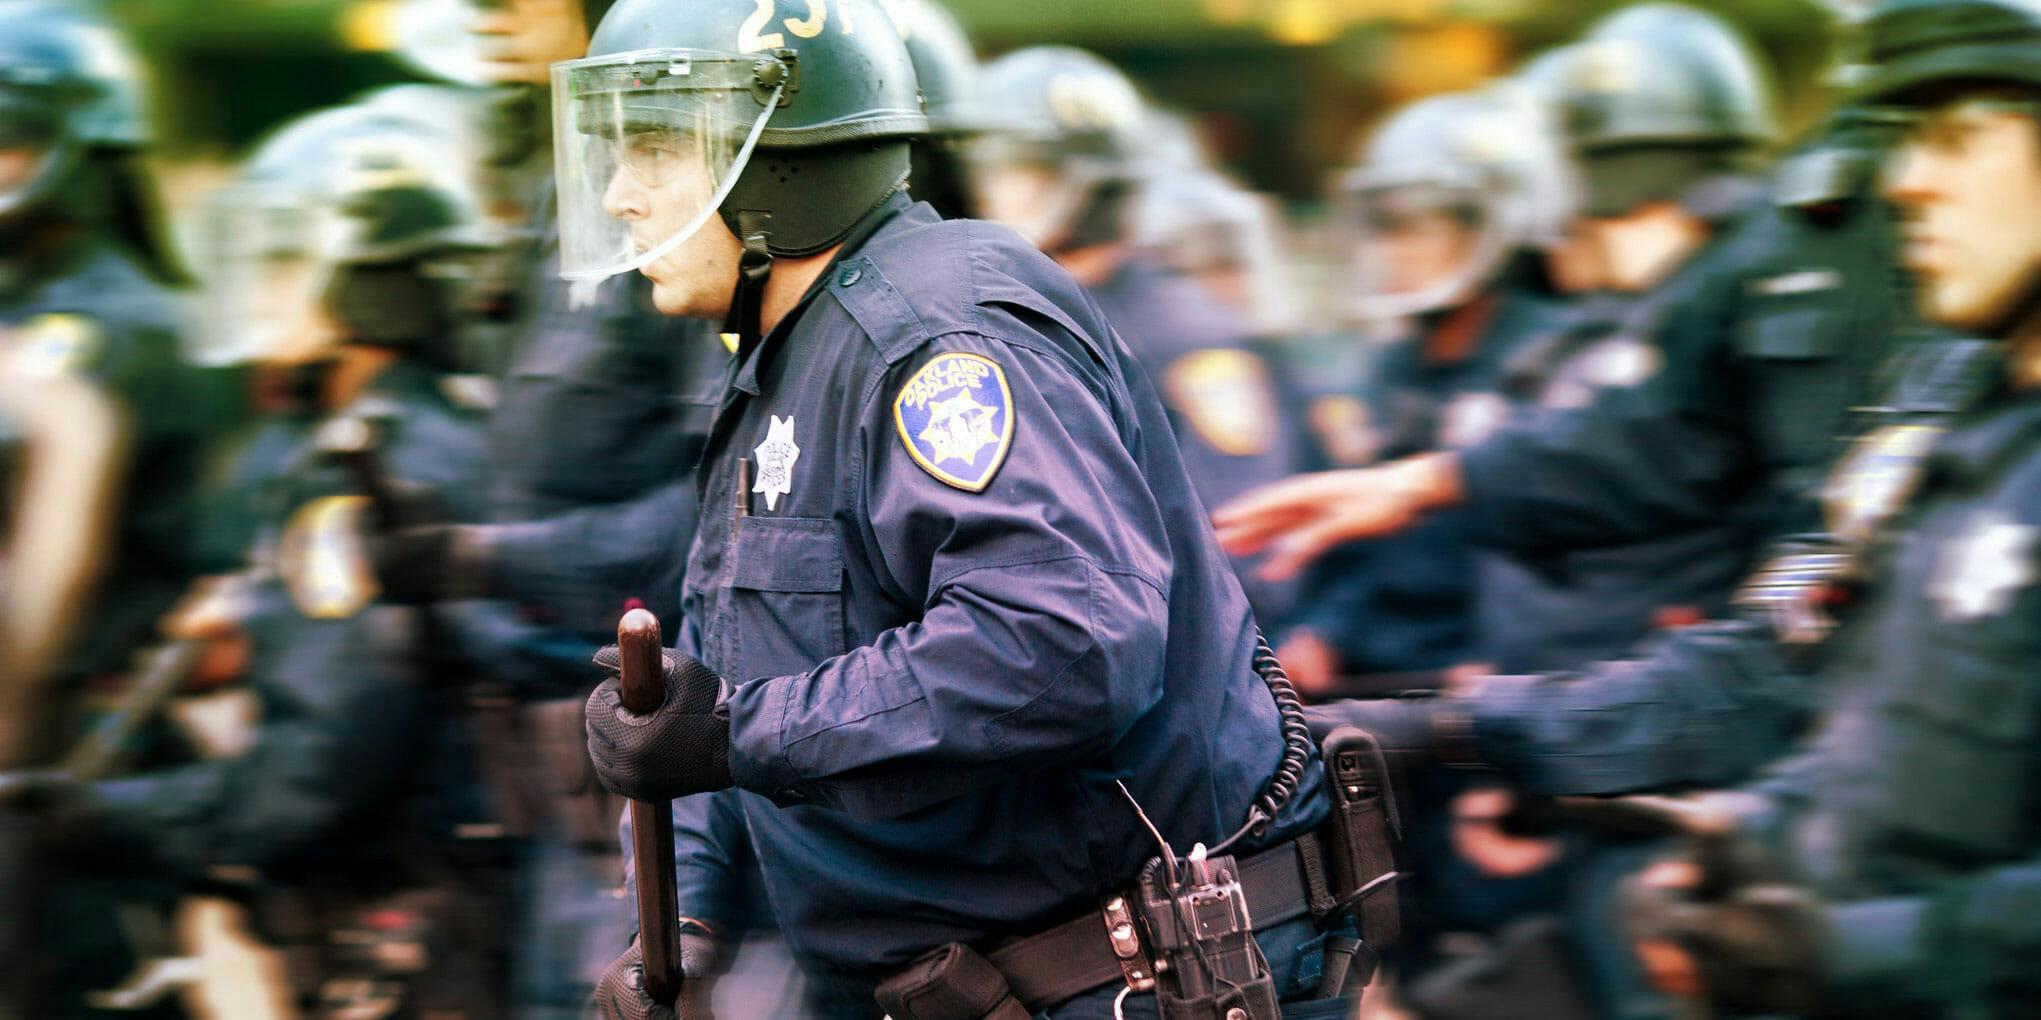 Database Tracks Police Brutality and Misconduct Cases in the U.S.